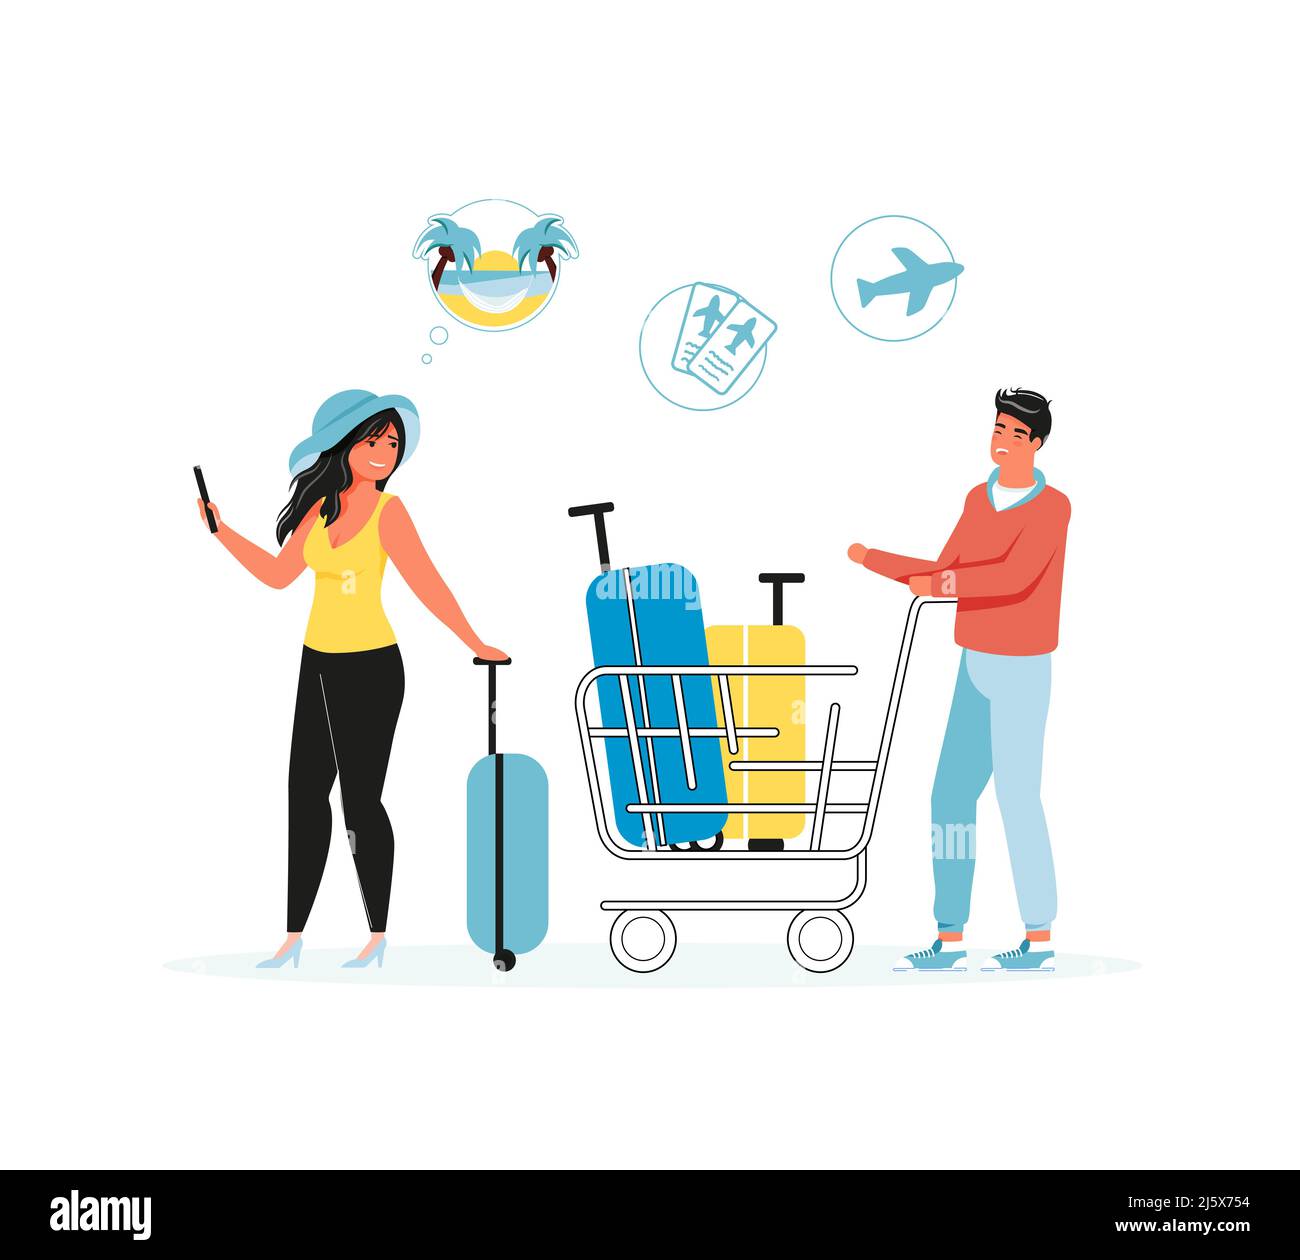 Travel people with luggage keeping social distance Stock Vector